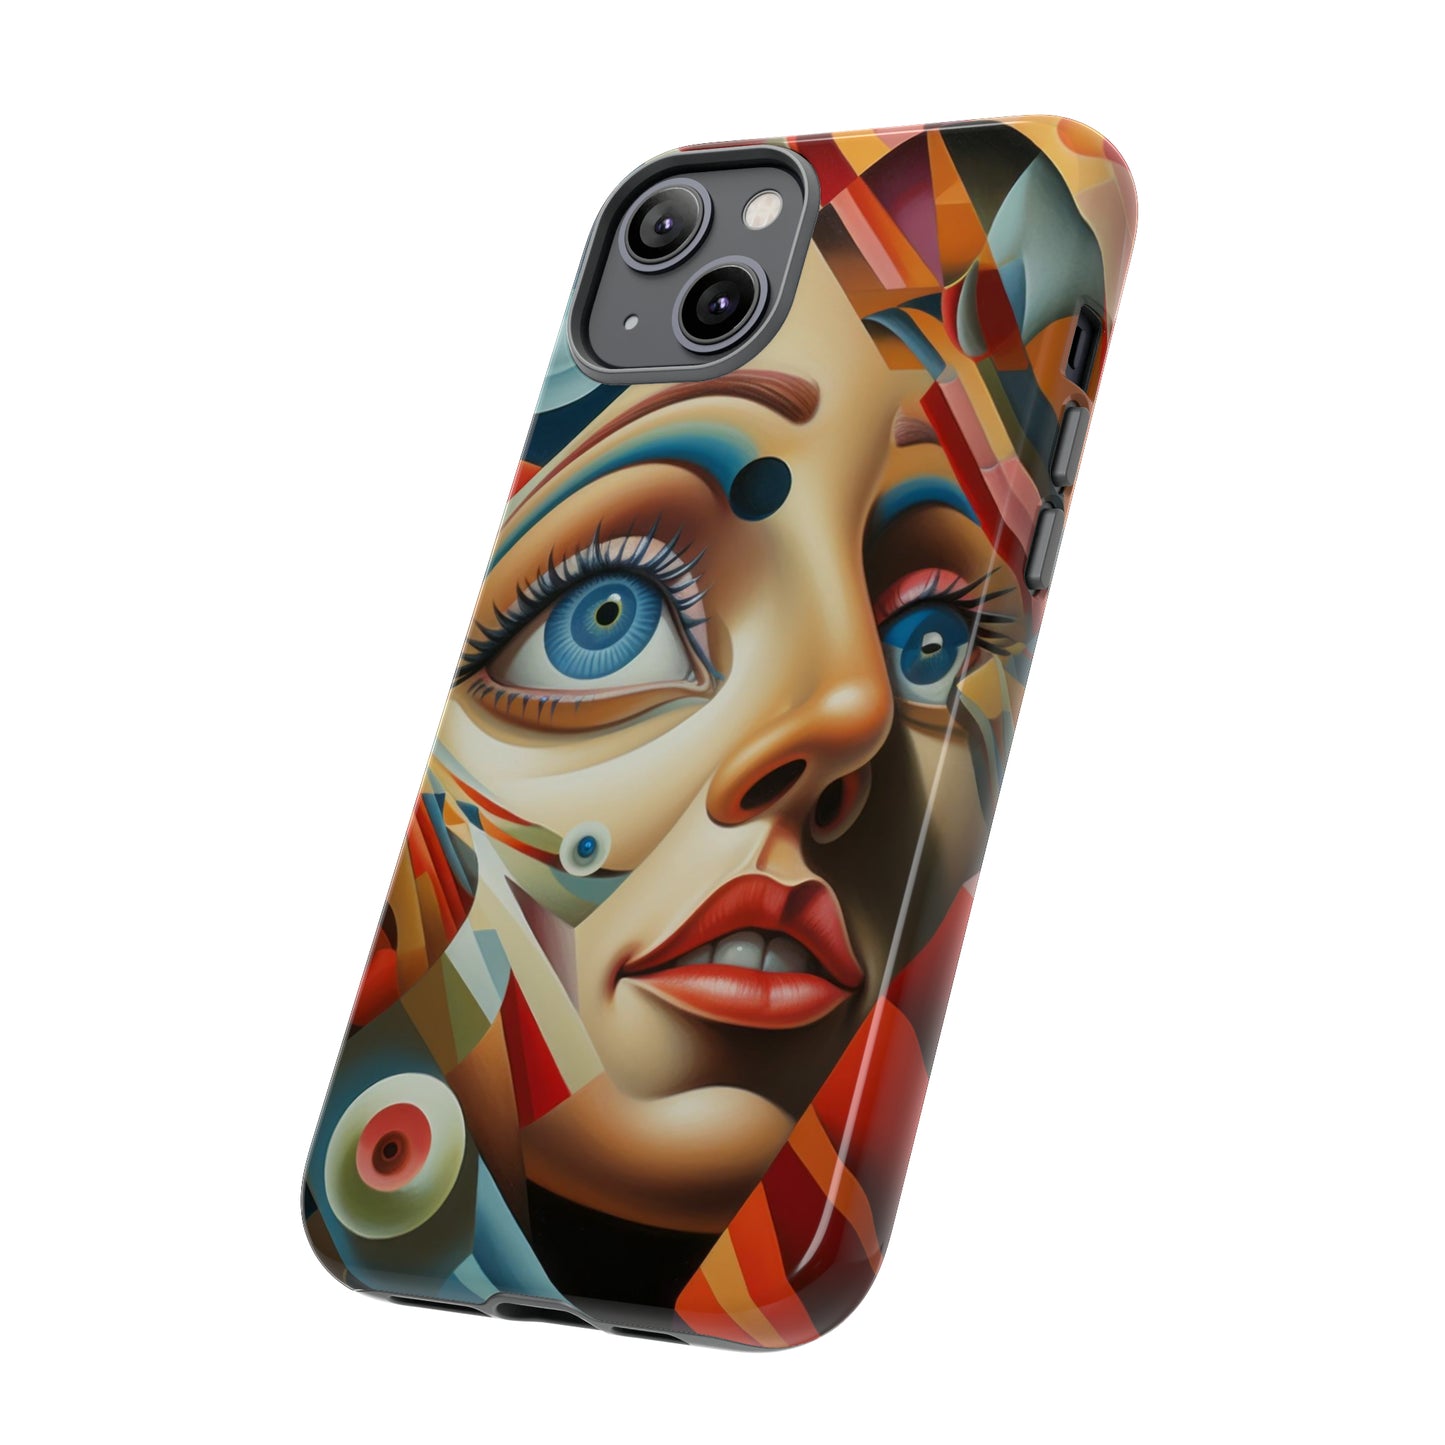 Surreal Shattering Reality Phone Case - Colorful Chaos Around a Woman's Face for iPhone, Samsung, Pixel